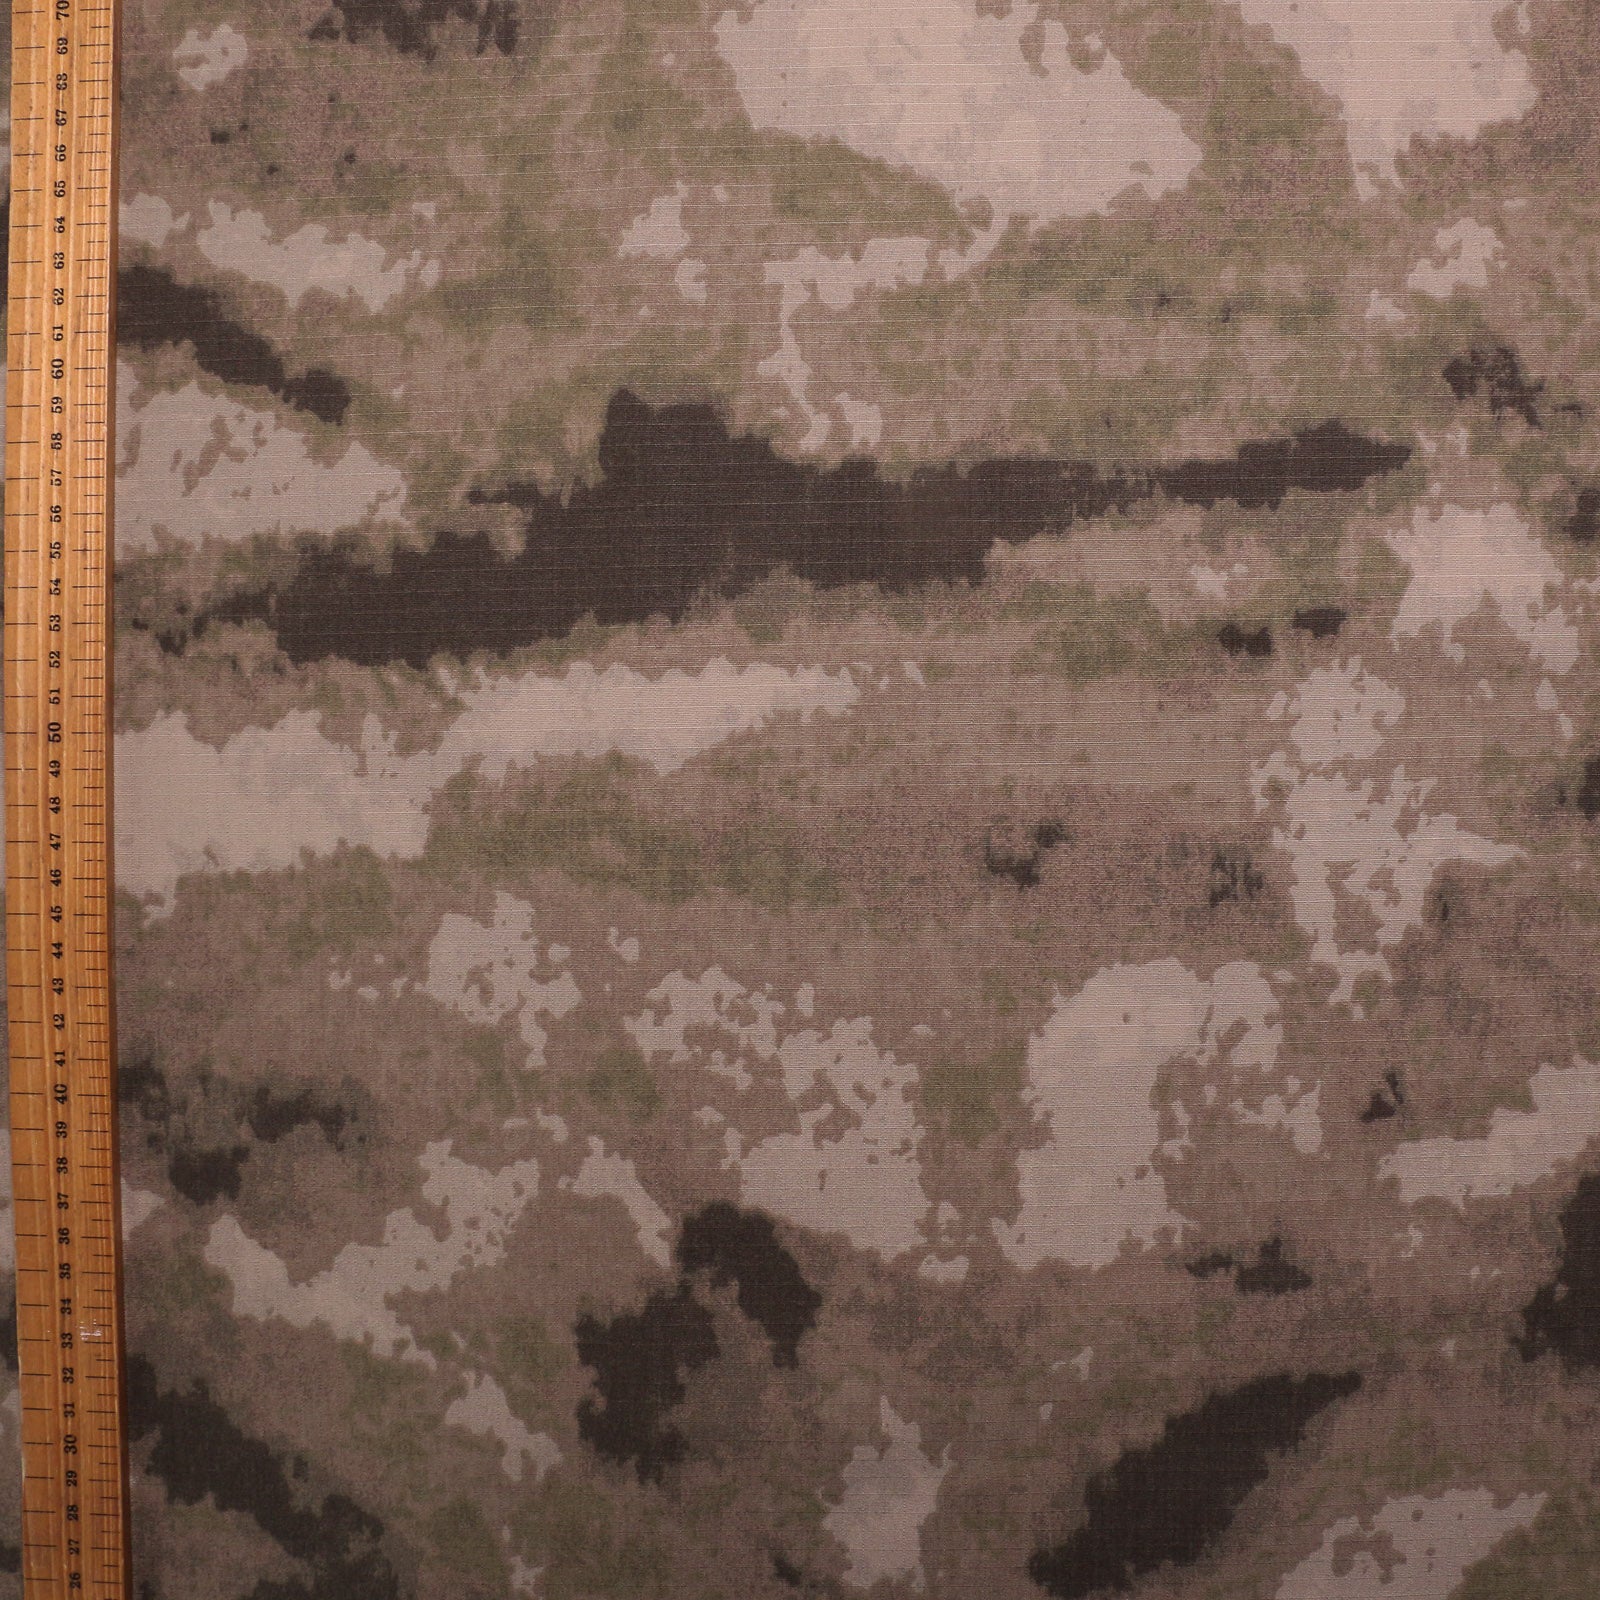 beige cotton ripstop semi digital camouflage dressmaking fabric in khaki green and brown